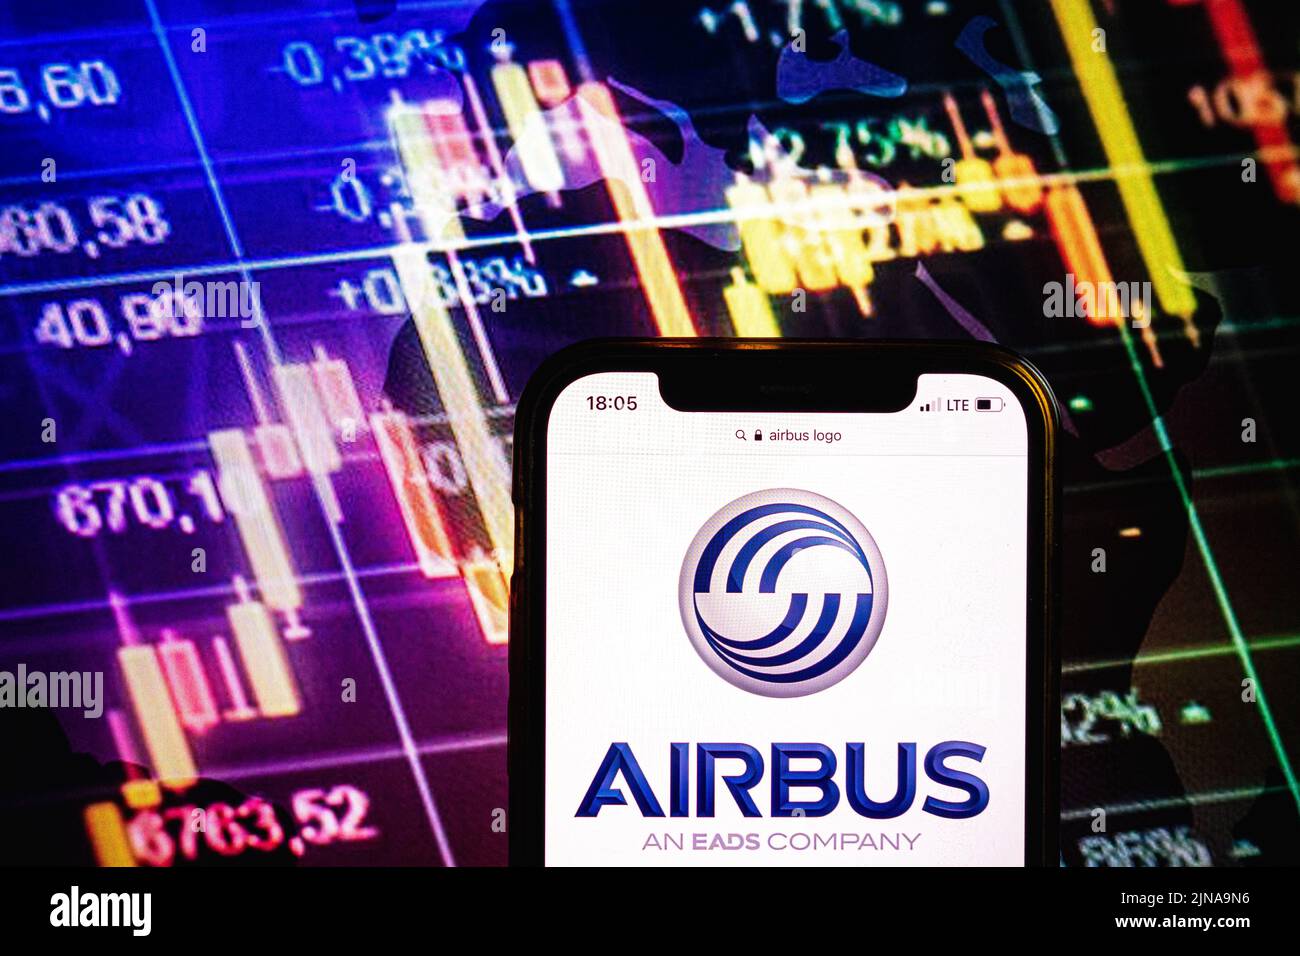 KONSKIE, POLAND - August 09, 2022: Smartphone displaying logo of Airbus company on stock exchange diagram background Stock Photo